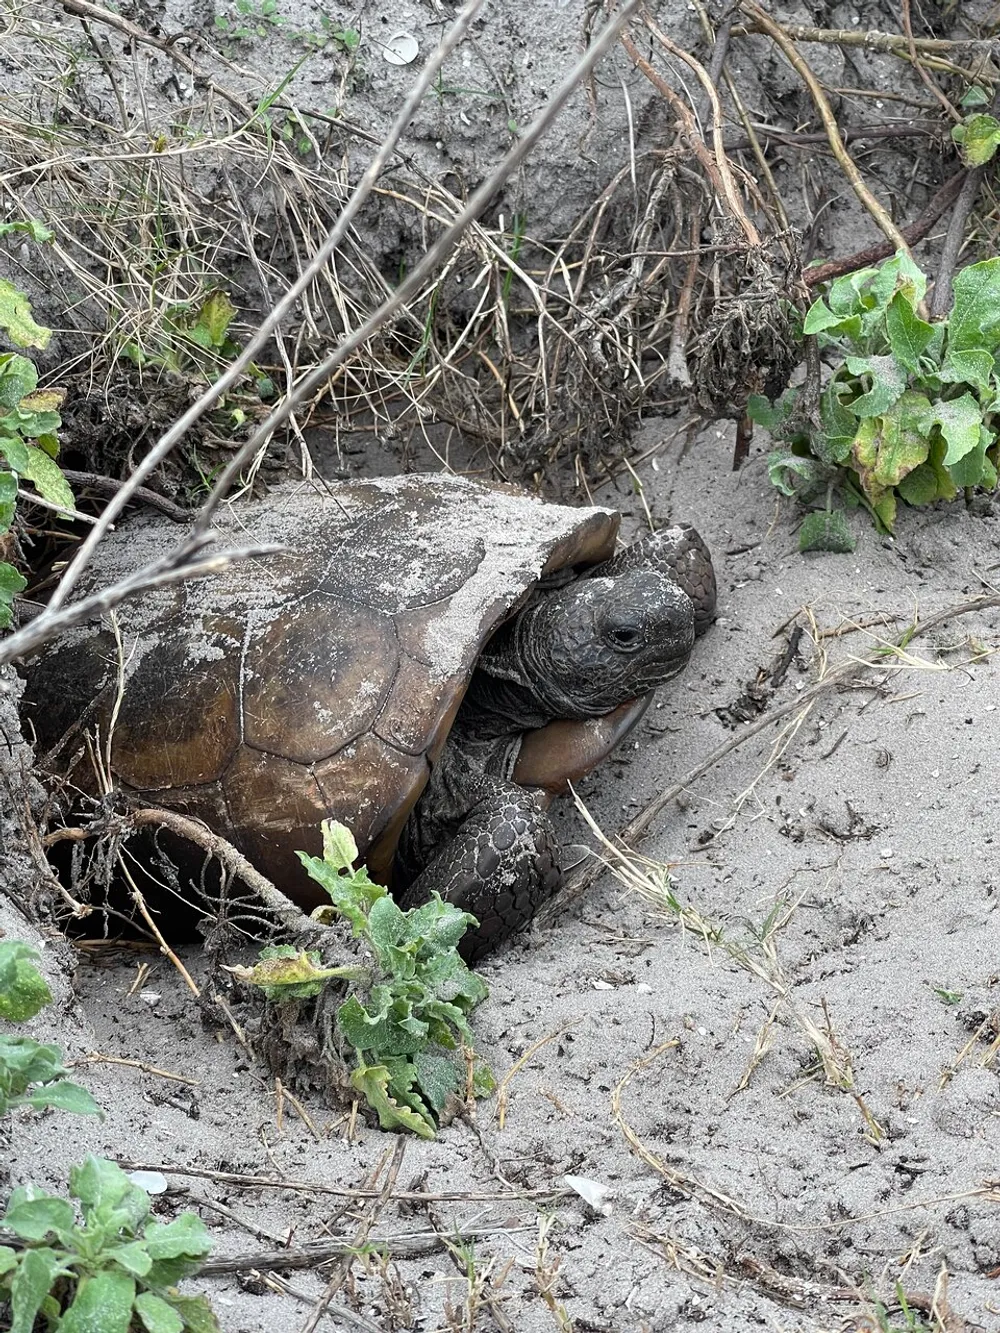 A tortoise partially covered in sand is peeking out from its shell amidst dry vegetation